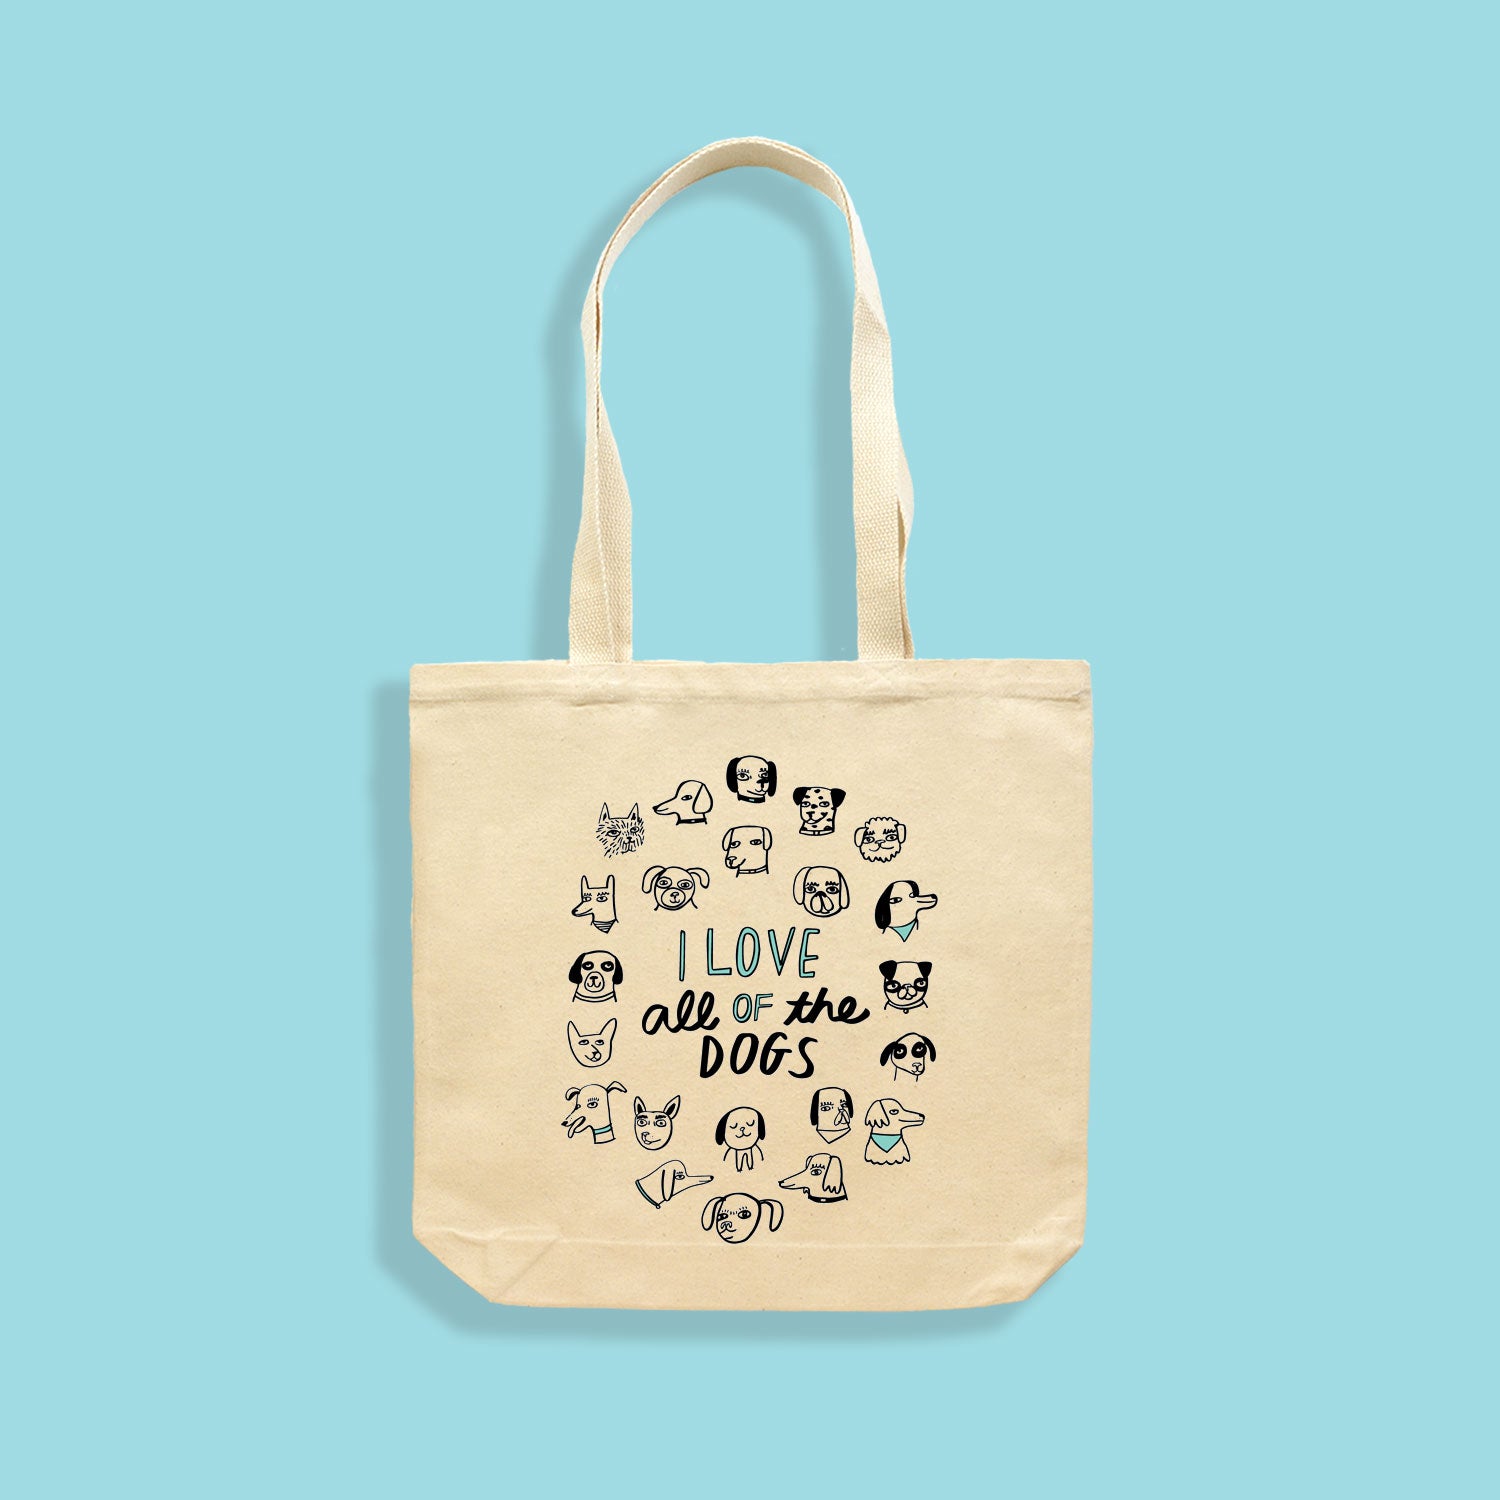 I Love All of the Dogs Make Original Natural Tote – MAKE Vancouver